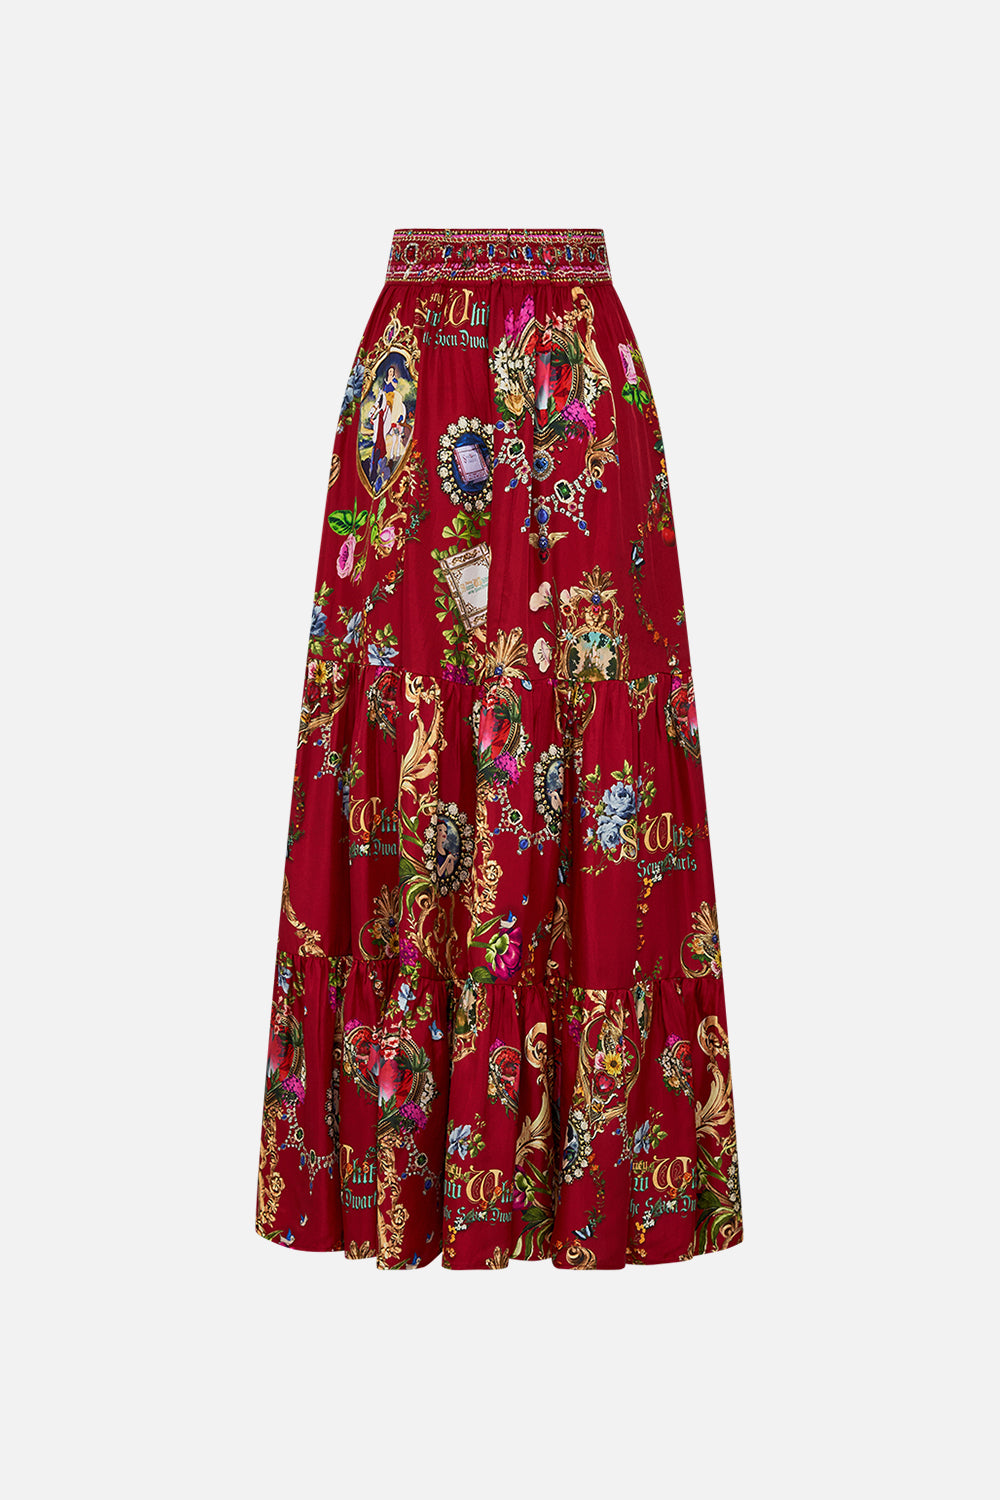 Disney CAMILLA high waisted skirt in Just One Bite Snow White print